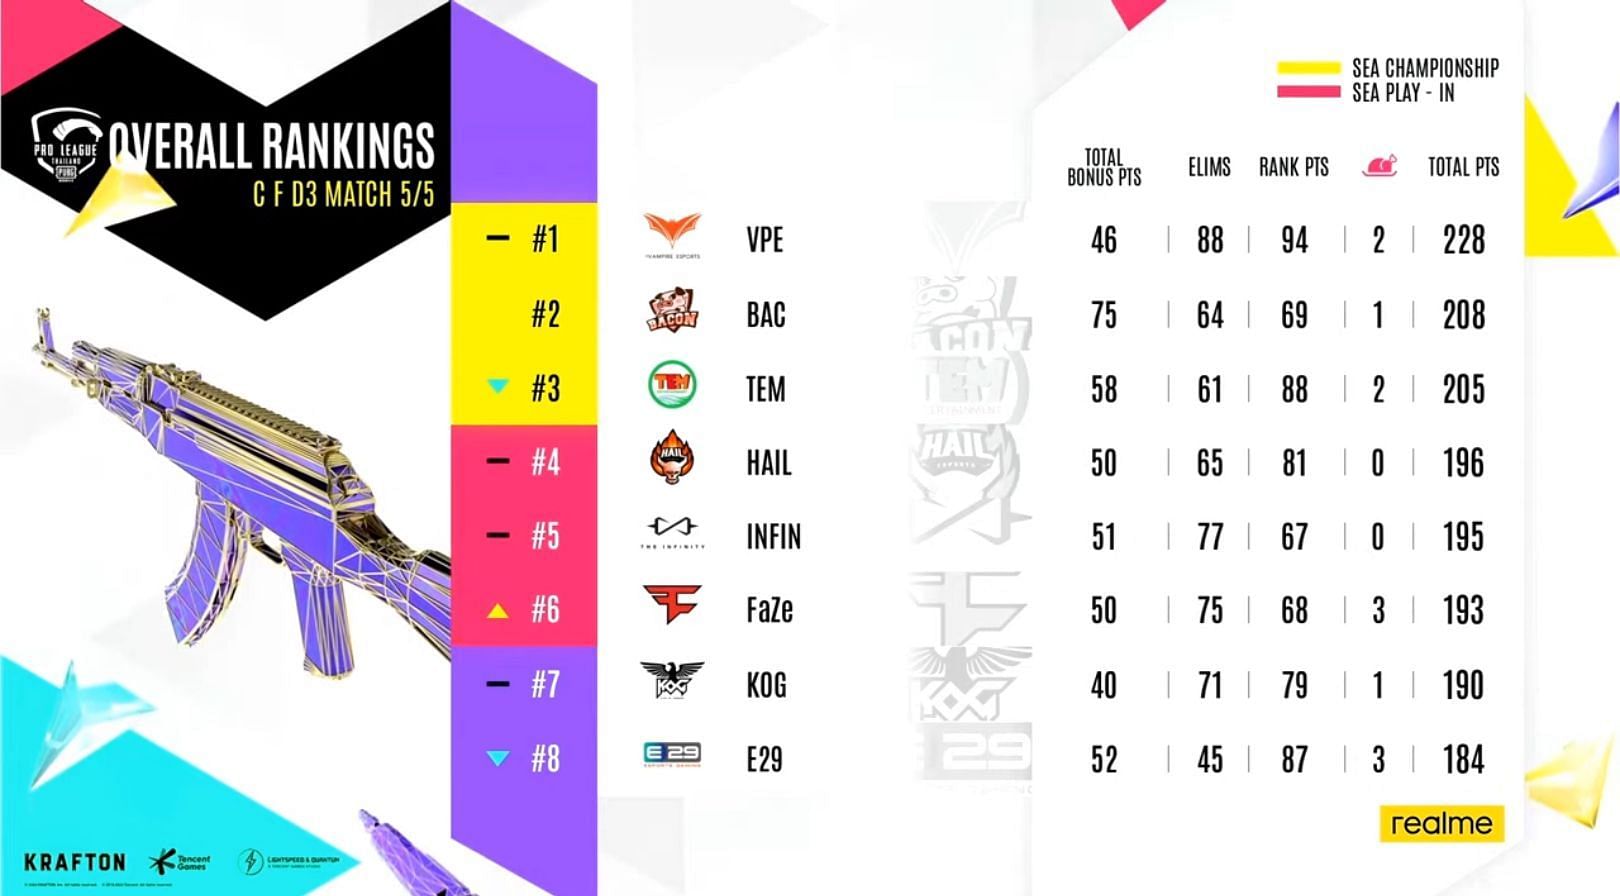 Faze Clan secured sixth place in Thailand Finals(Image via PUBG Mobile)